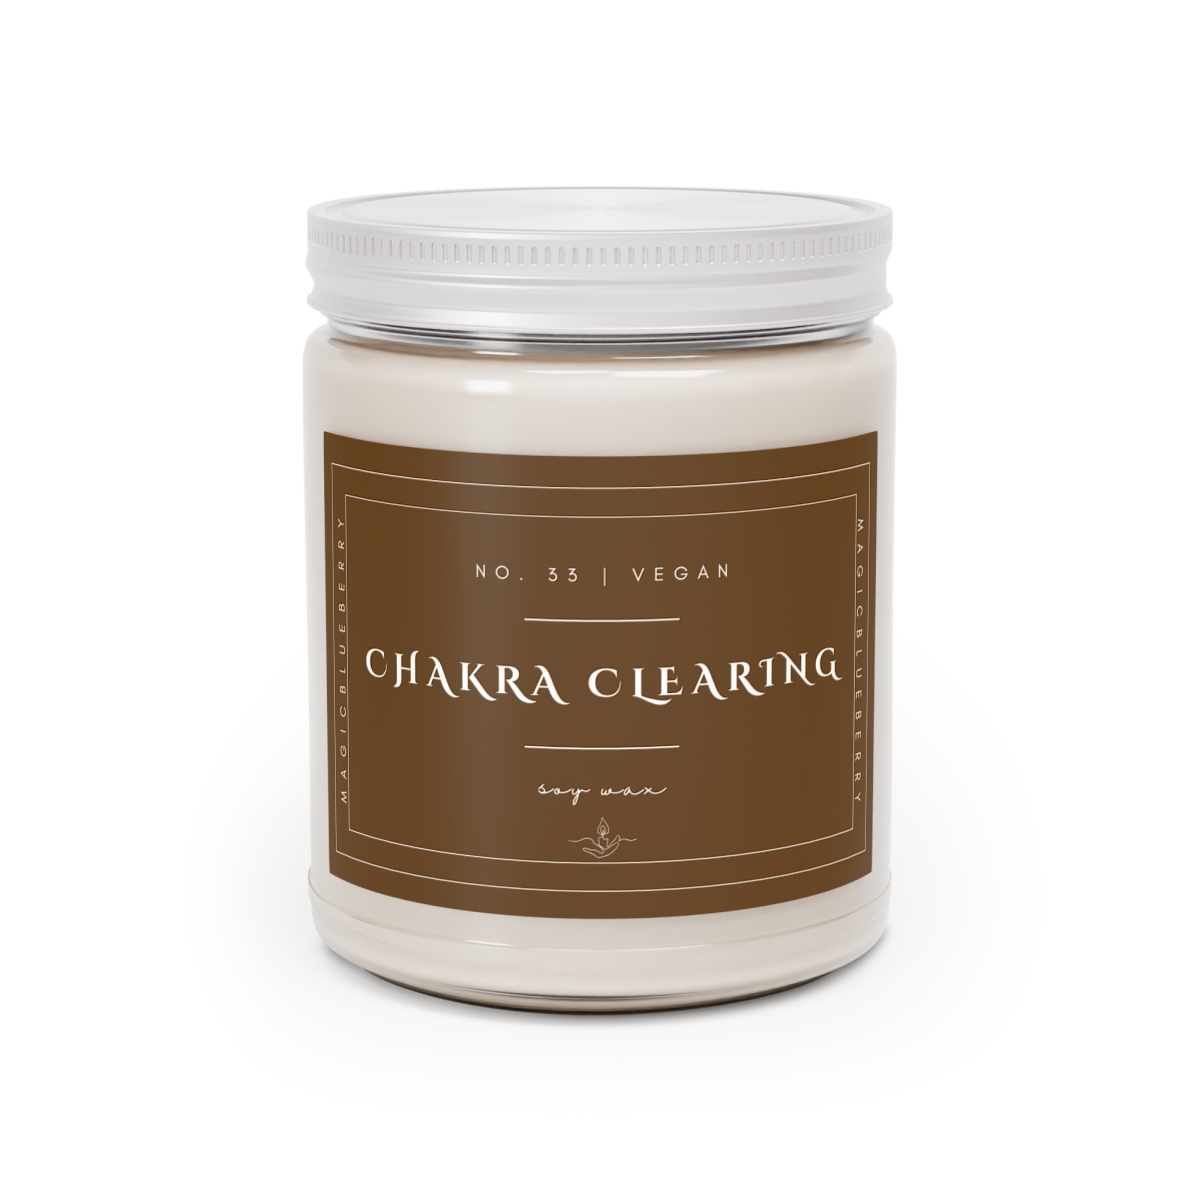 Chakra Clearing - Scented Soy Wax Candle | Clear Jar | Vegan Manifestation Spell Candle | Coconut Soy Candle 9oz | Healing product thumbnail image